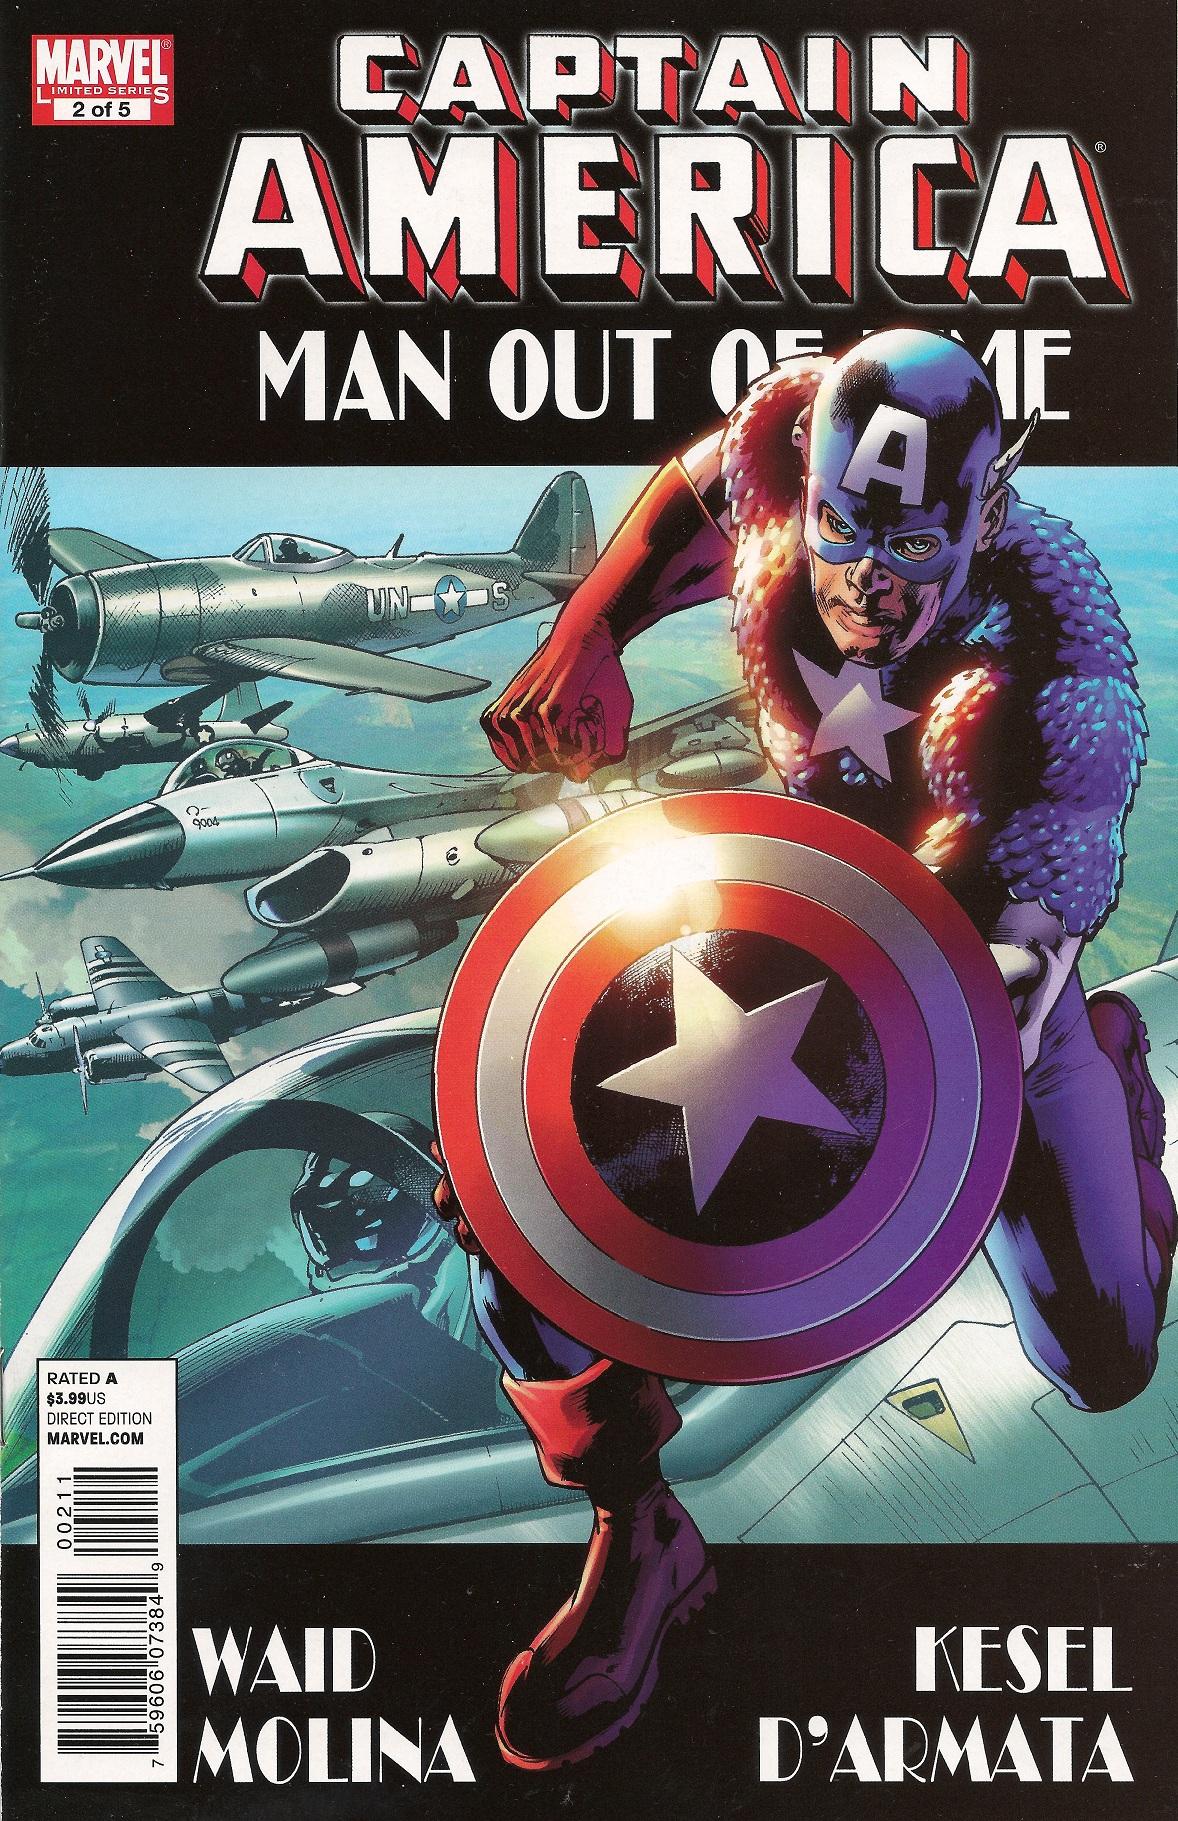 Captain America: Man Out of Time Vol. 1 #2